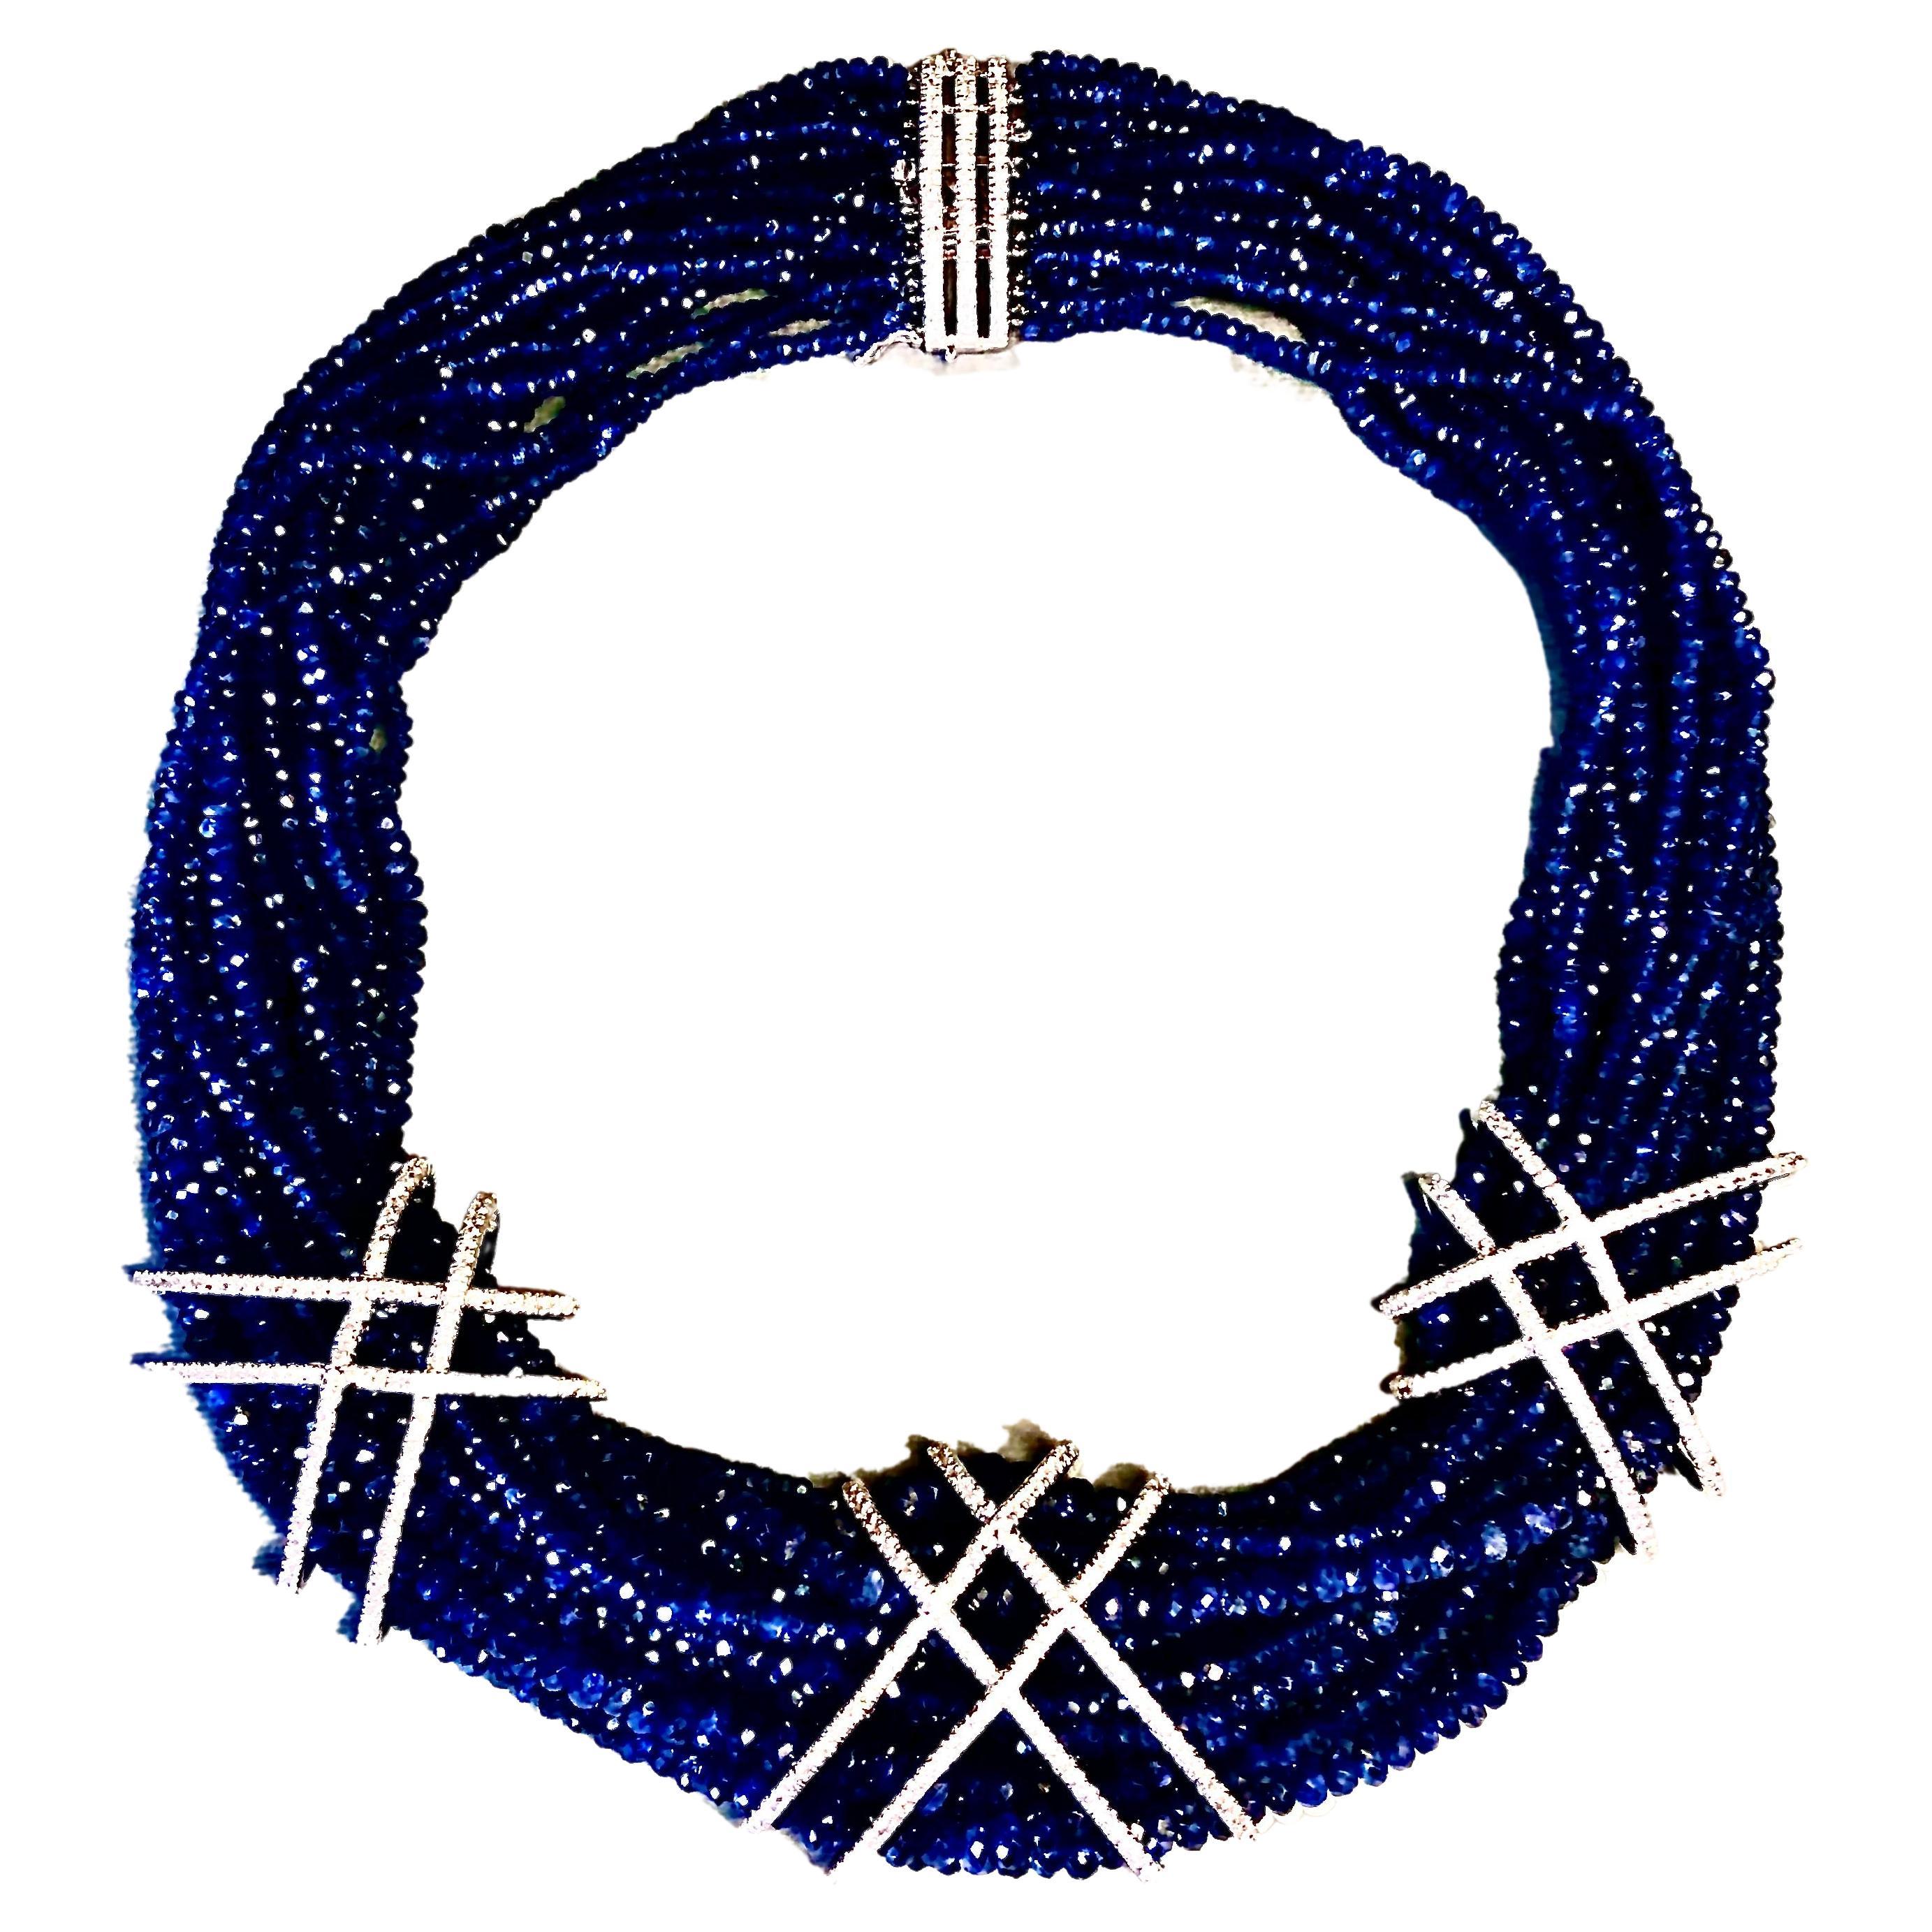 Multi strand necklace/choker of deep blue faceted sapphires and diamonds.